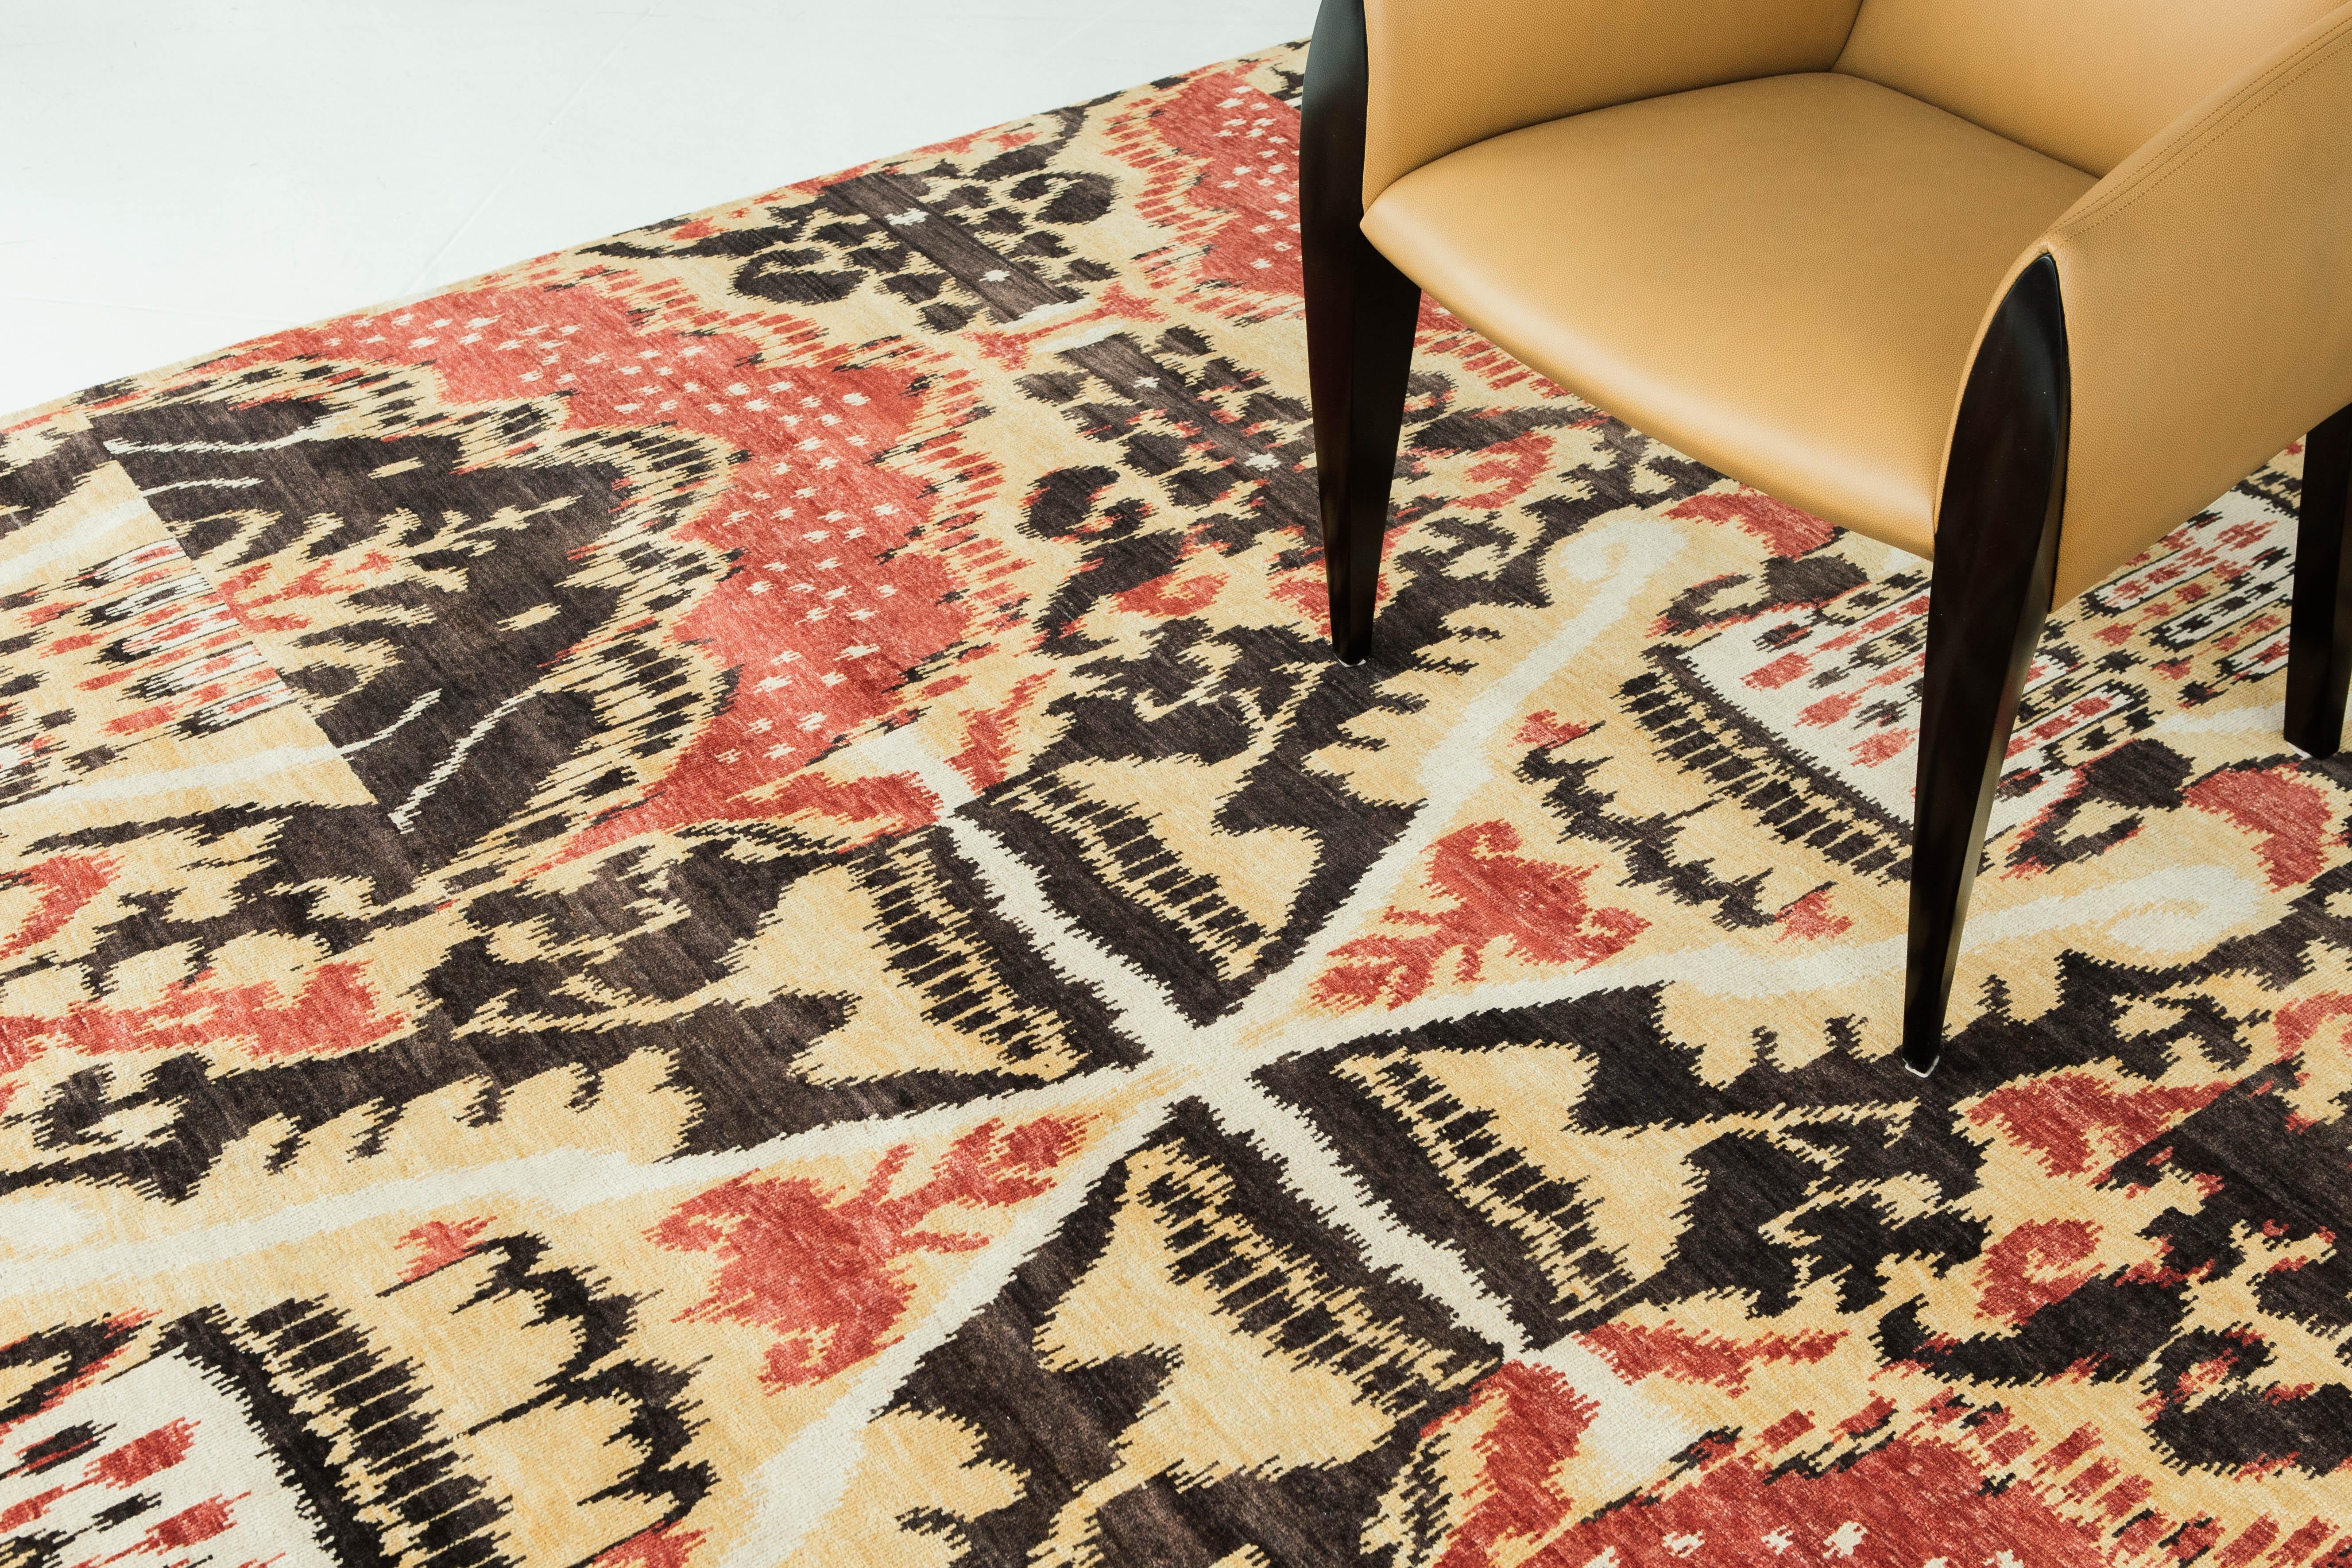 A lively Ikat design rug in lustrous gold, cherry red, black, and ivory. This wool pile weave is both playful yet sophisticated and will elevate any design space. 


Rug number: 19200
Size: 8' 11